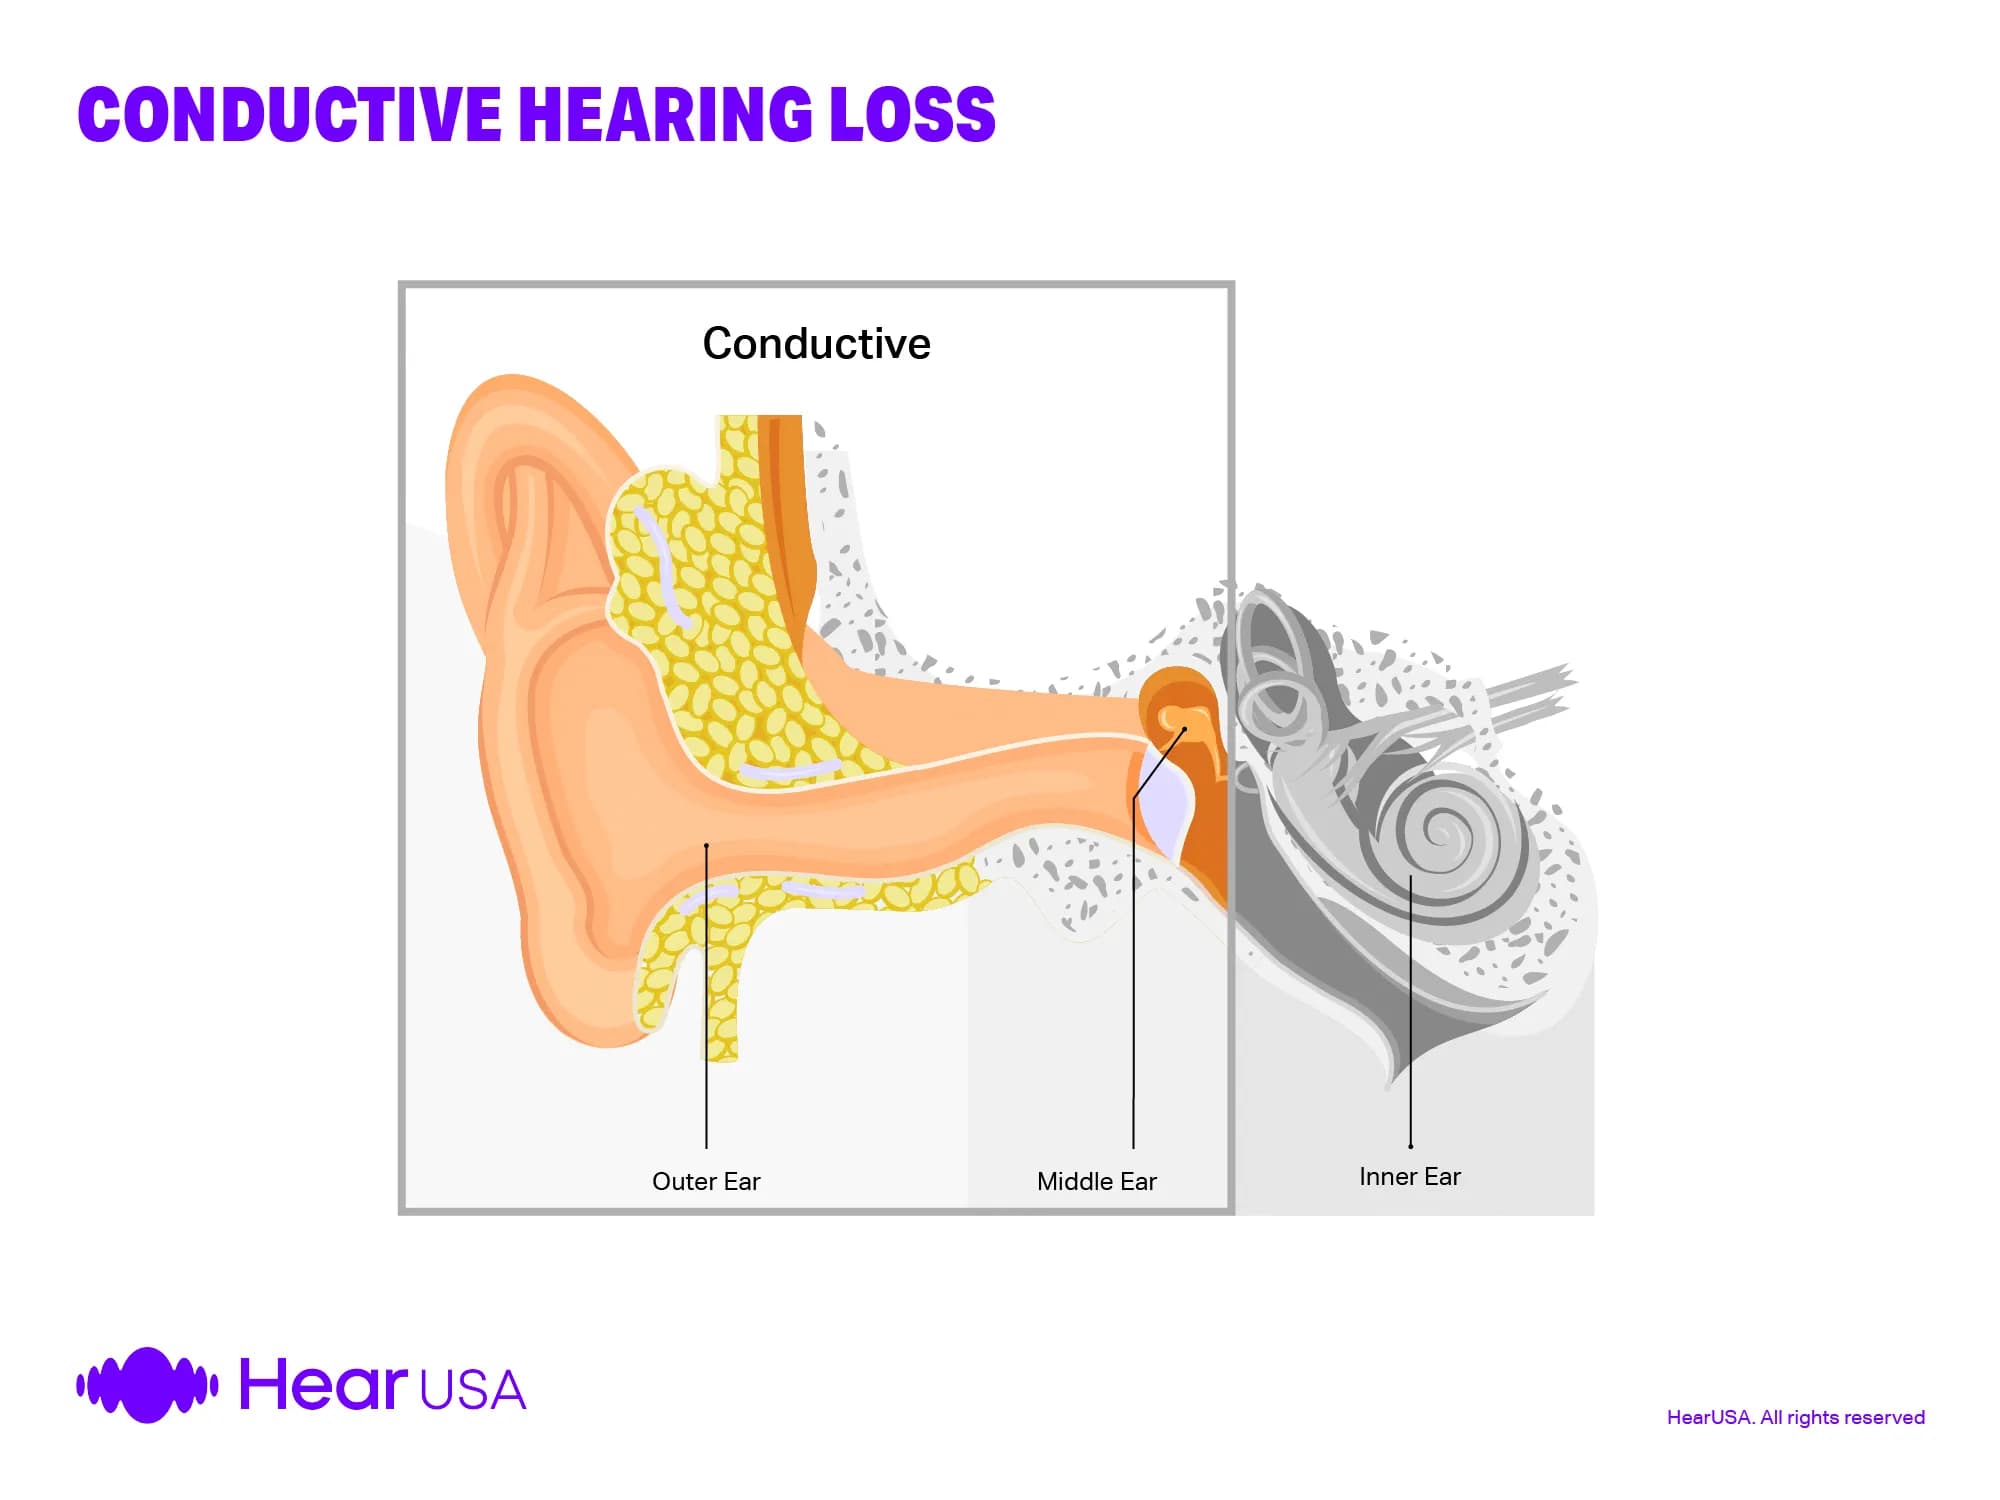 Conductive hearing loss is in the middle ear